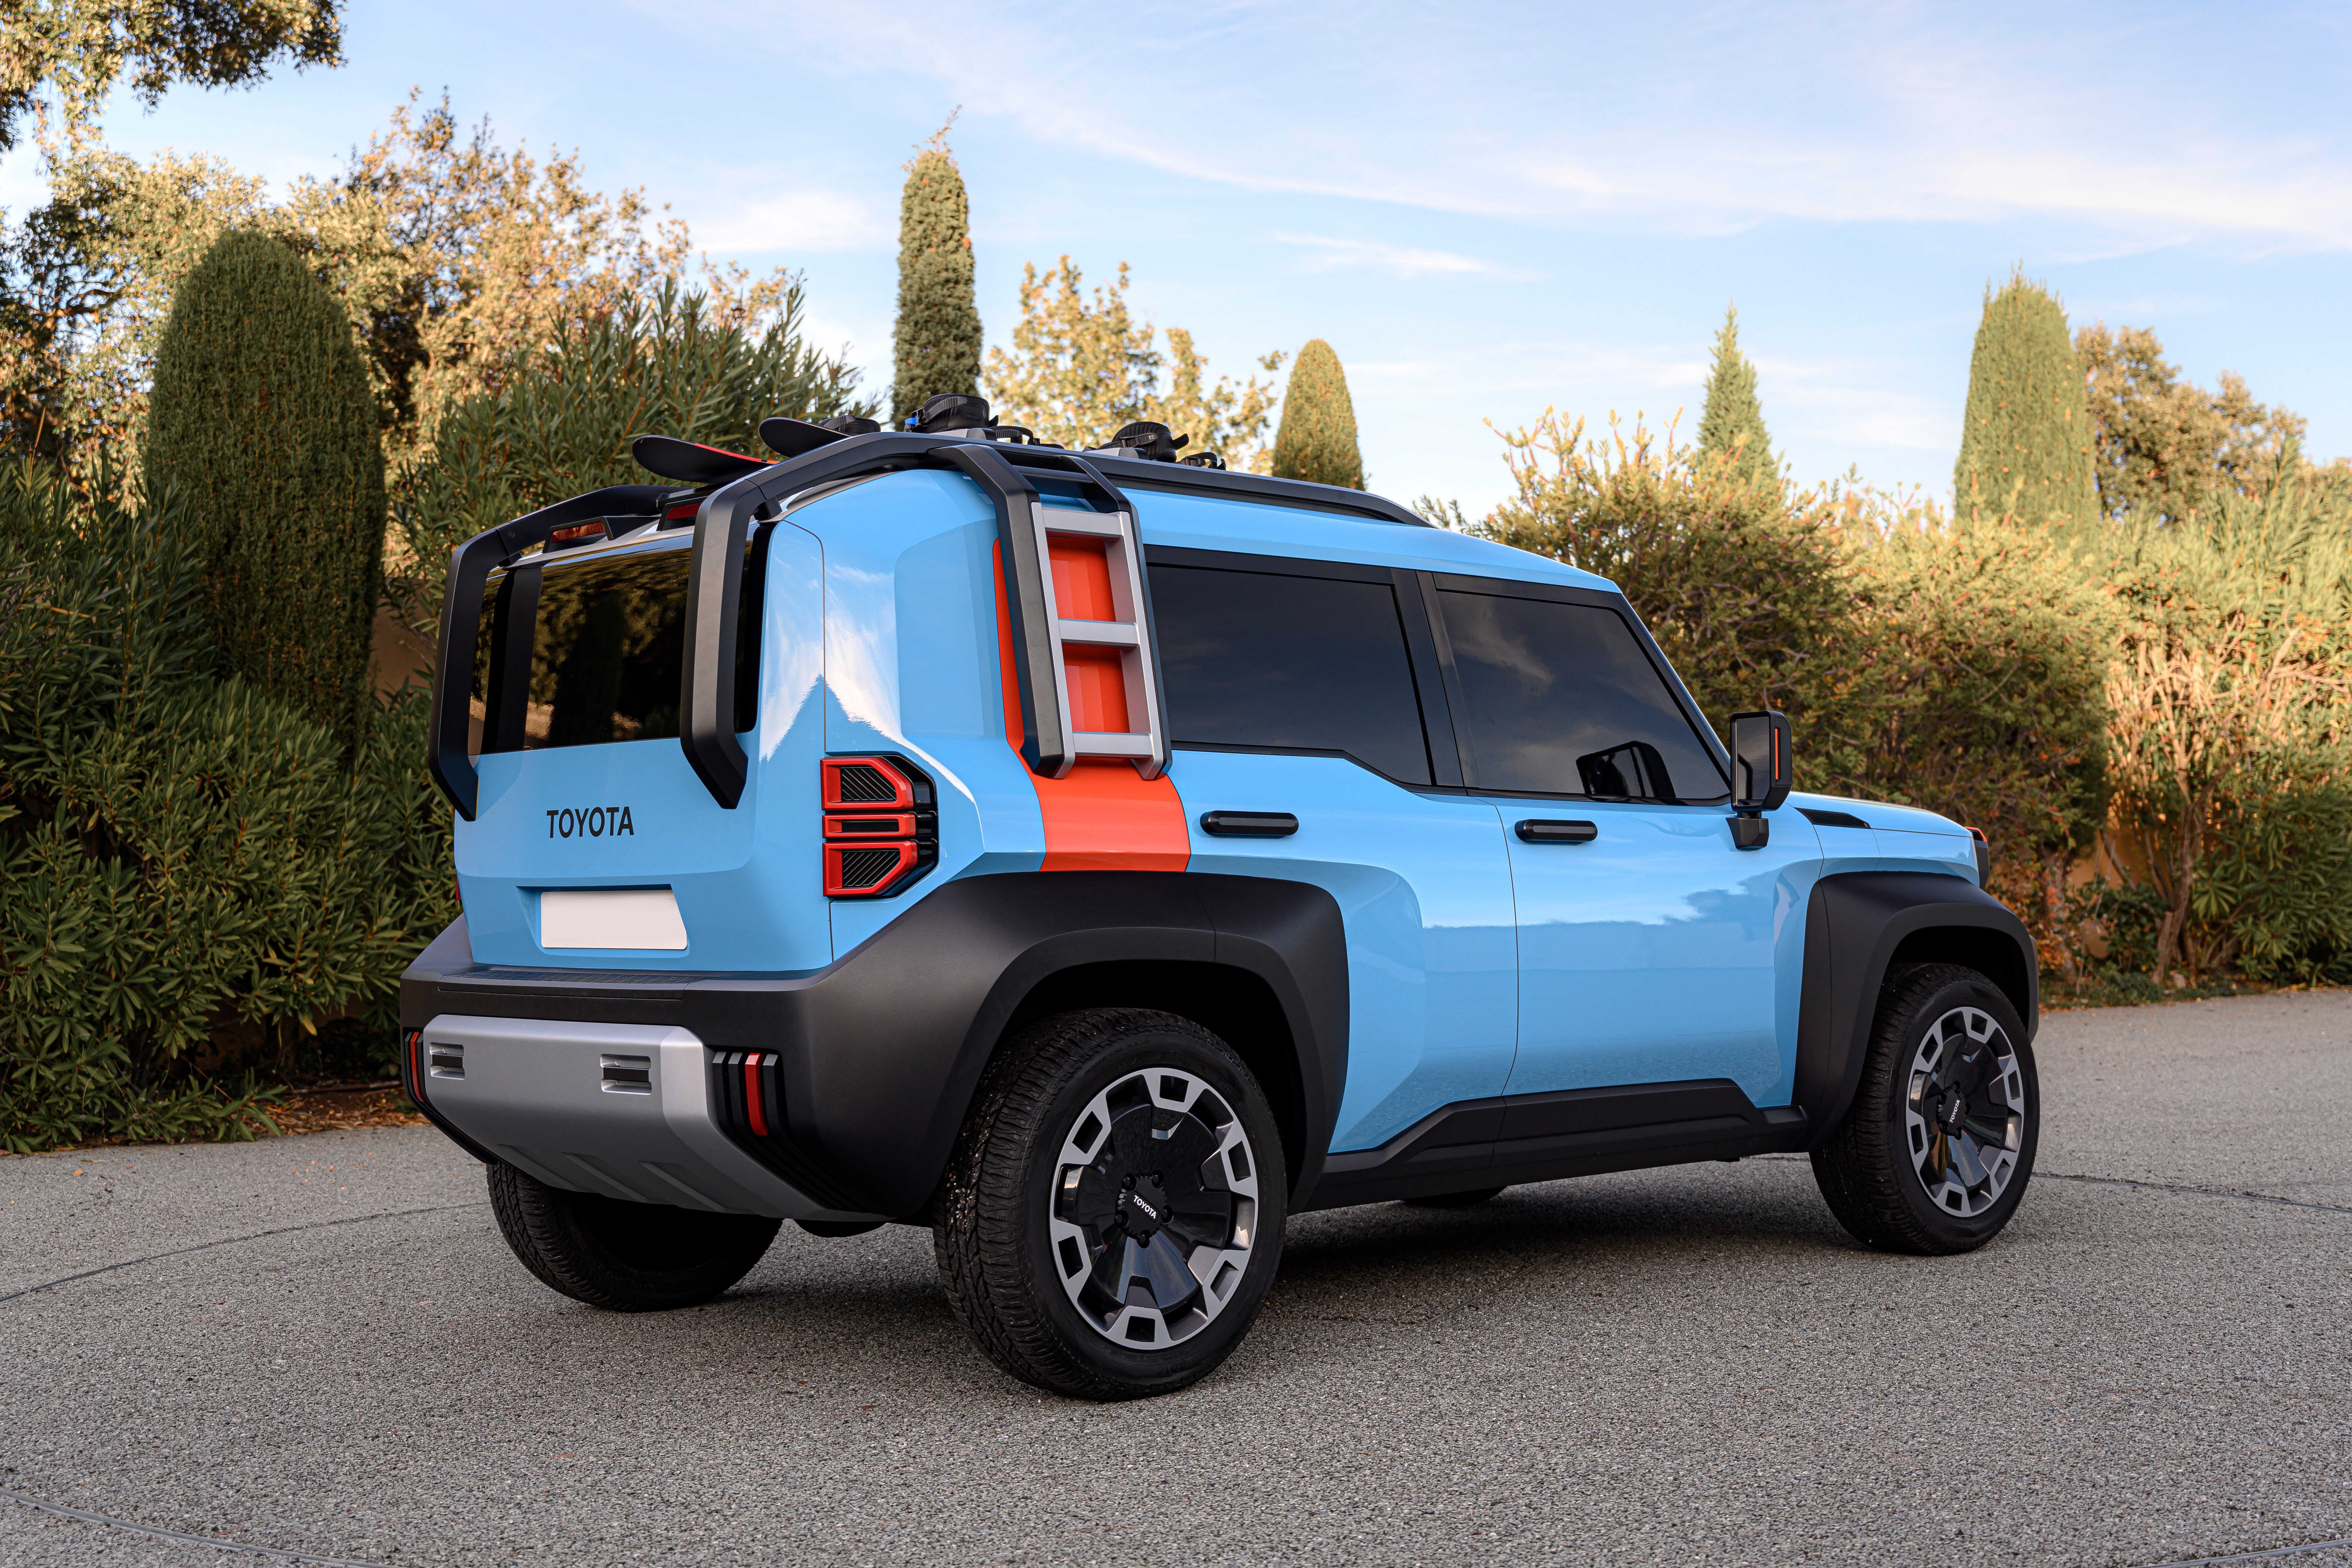 Toyota Compact Cruiser EV Looks Fantastic in New Photos